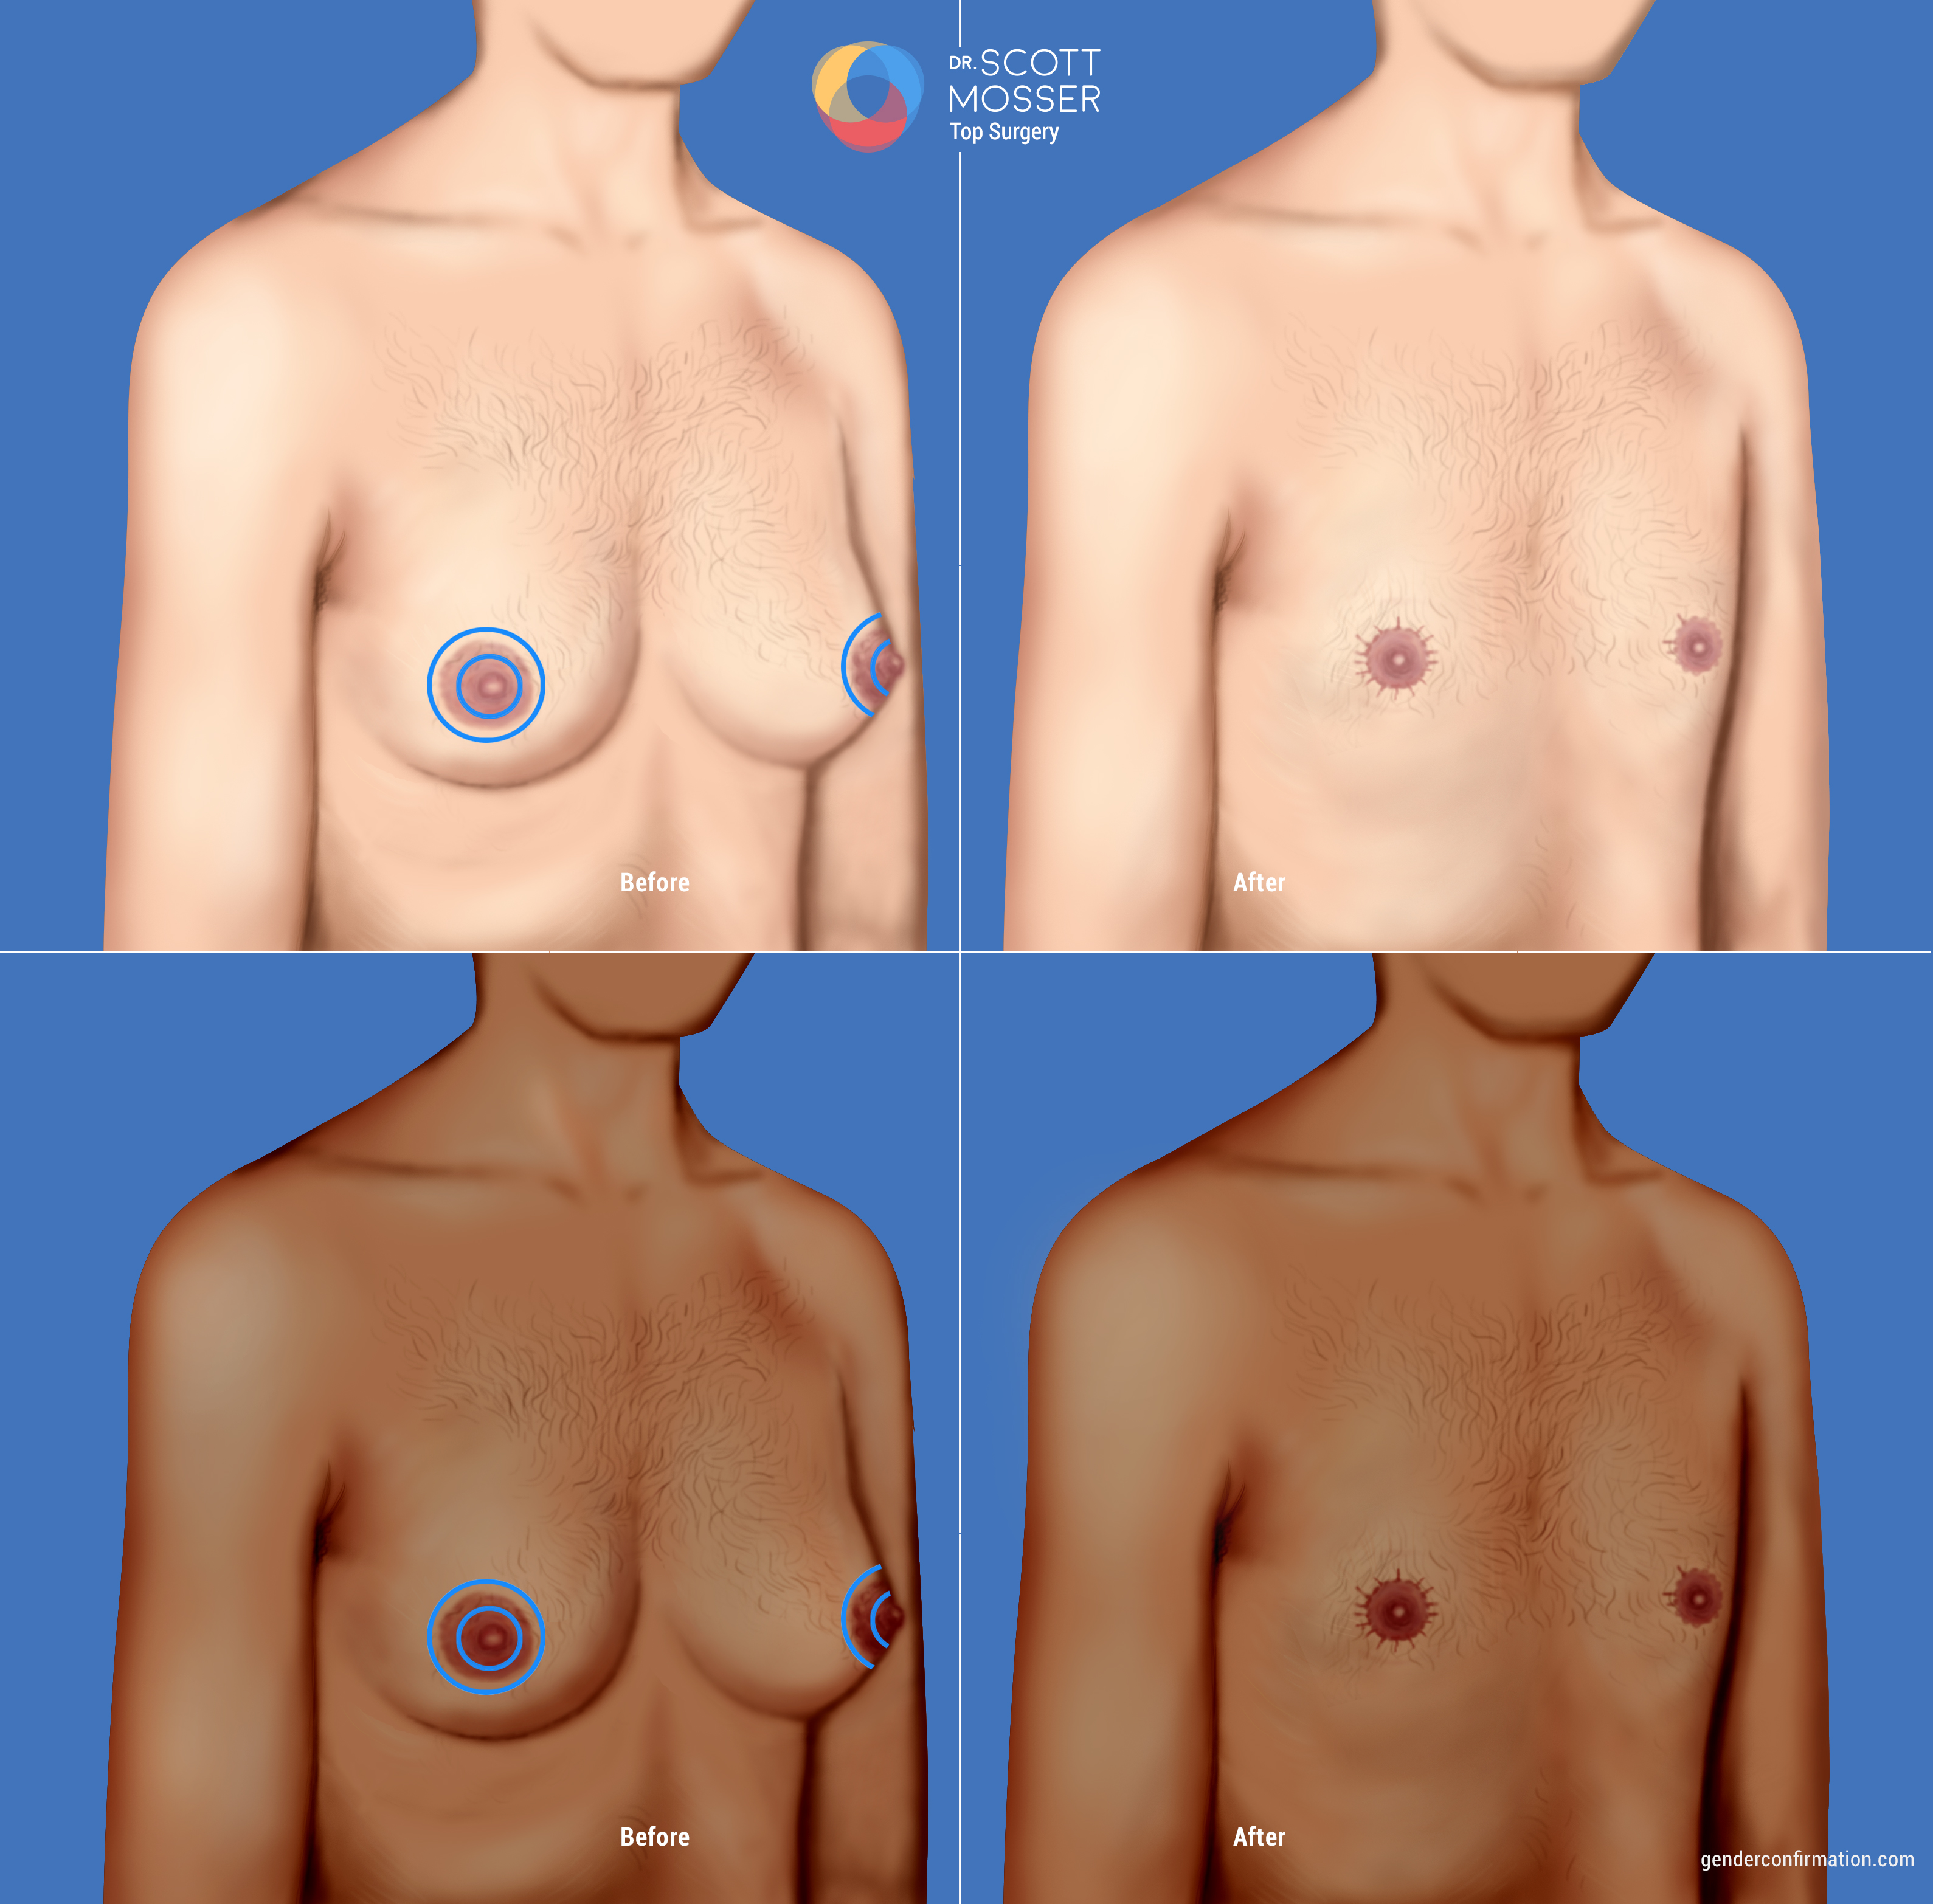 Areola Reduction Surgery - Techniques & Recovery